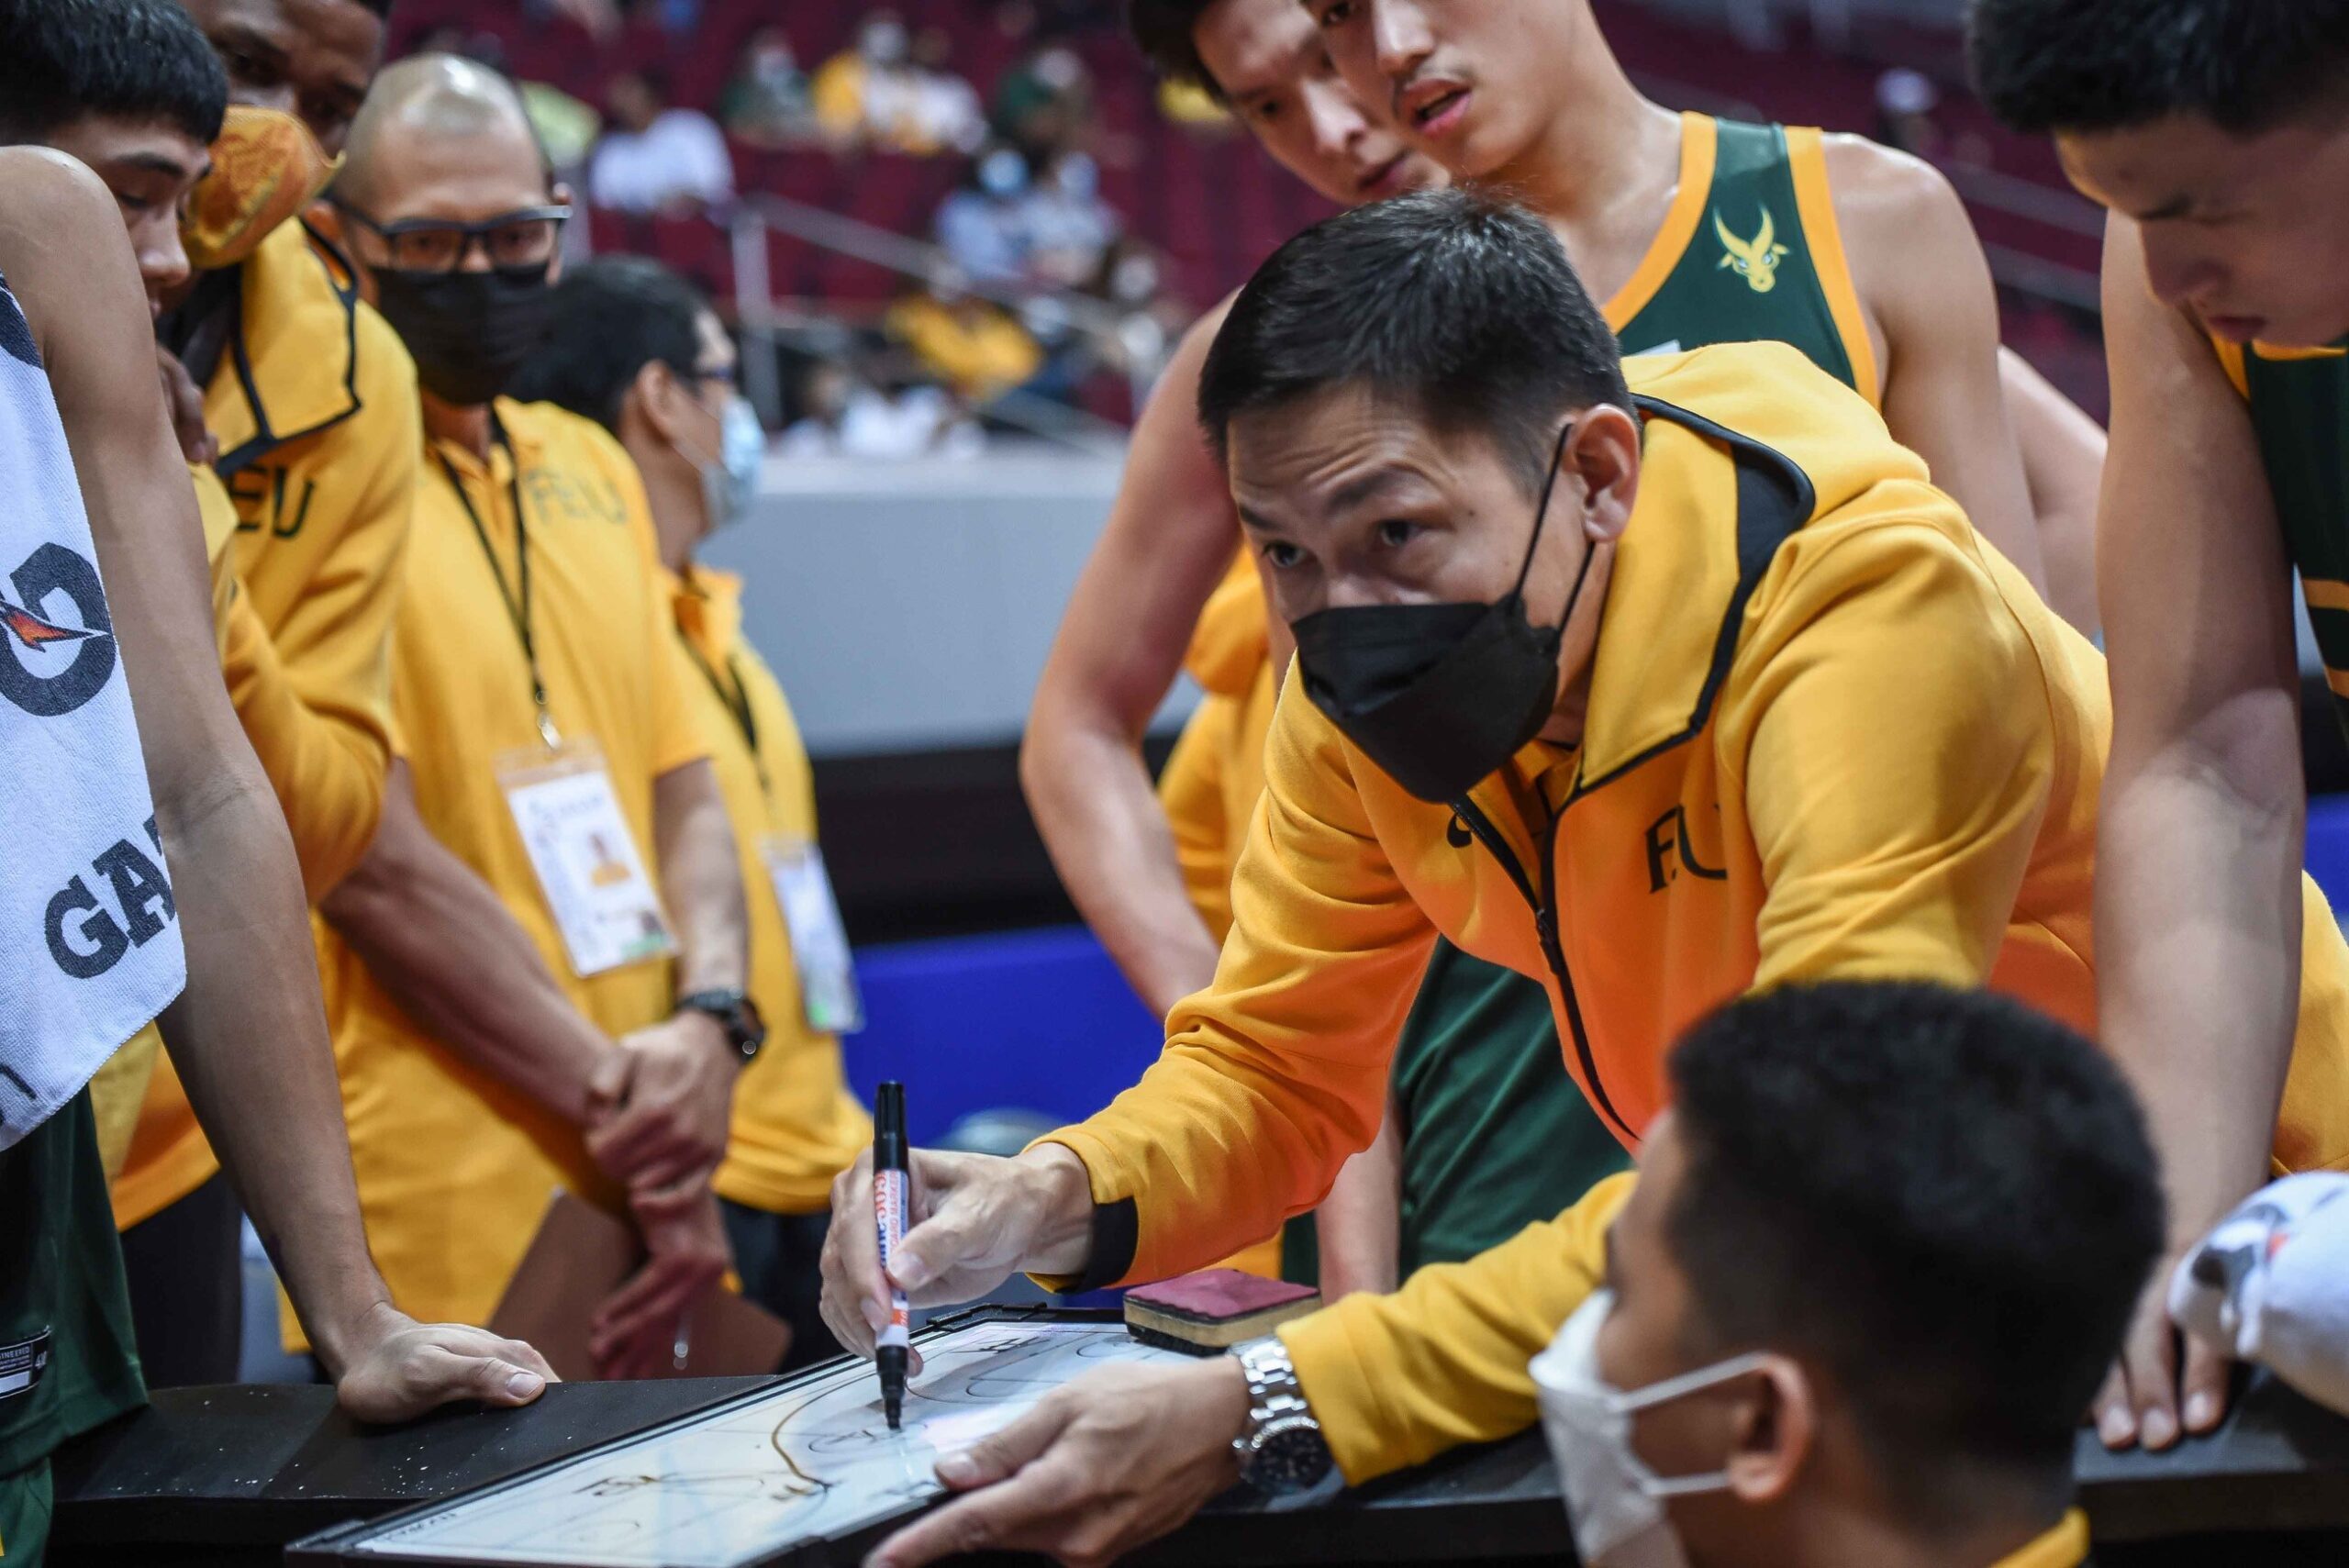 Racela rivalry: ‘Mixed emotions’ for Olsen after FEU win over Nash, Adamson